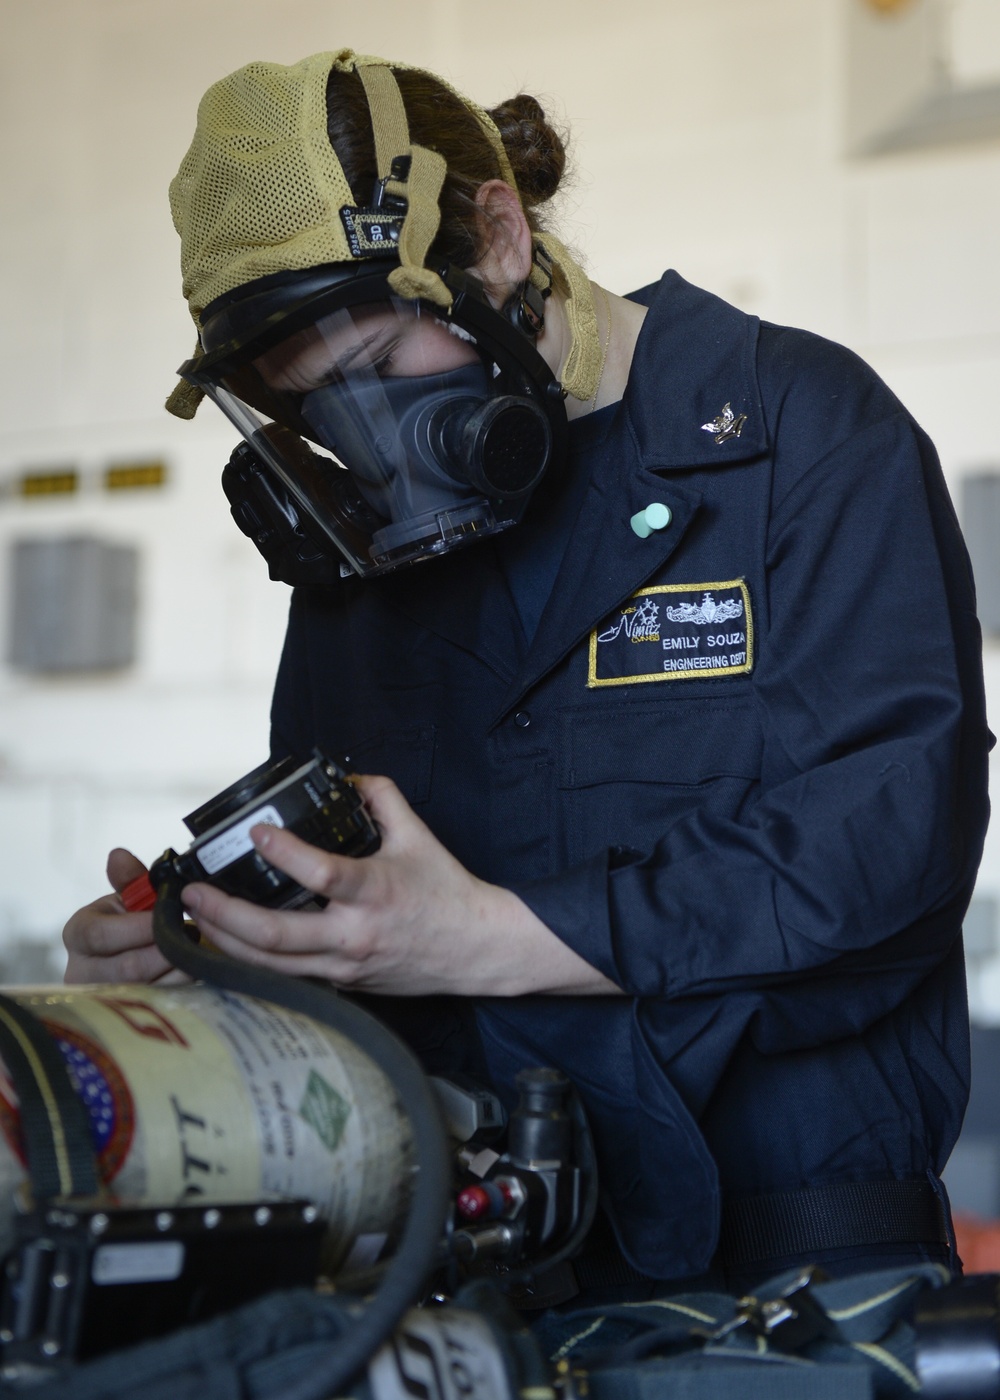 Sailor conducts SCBA inspection